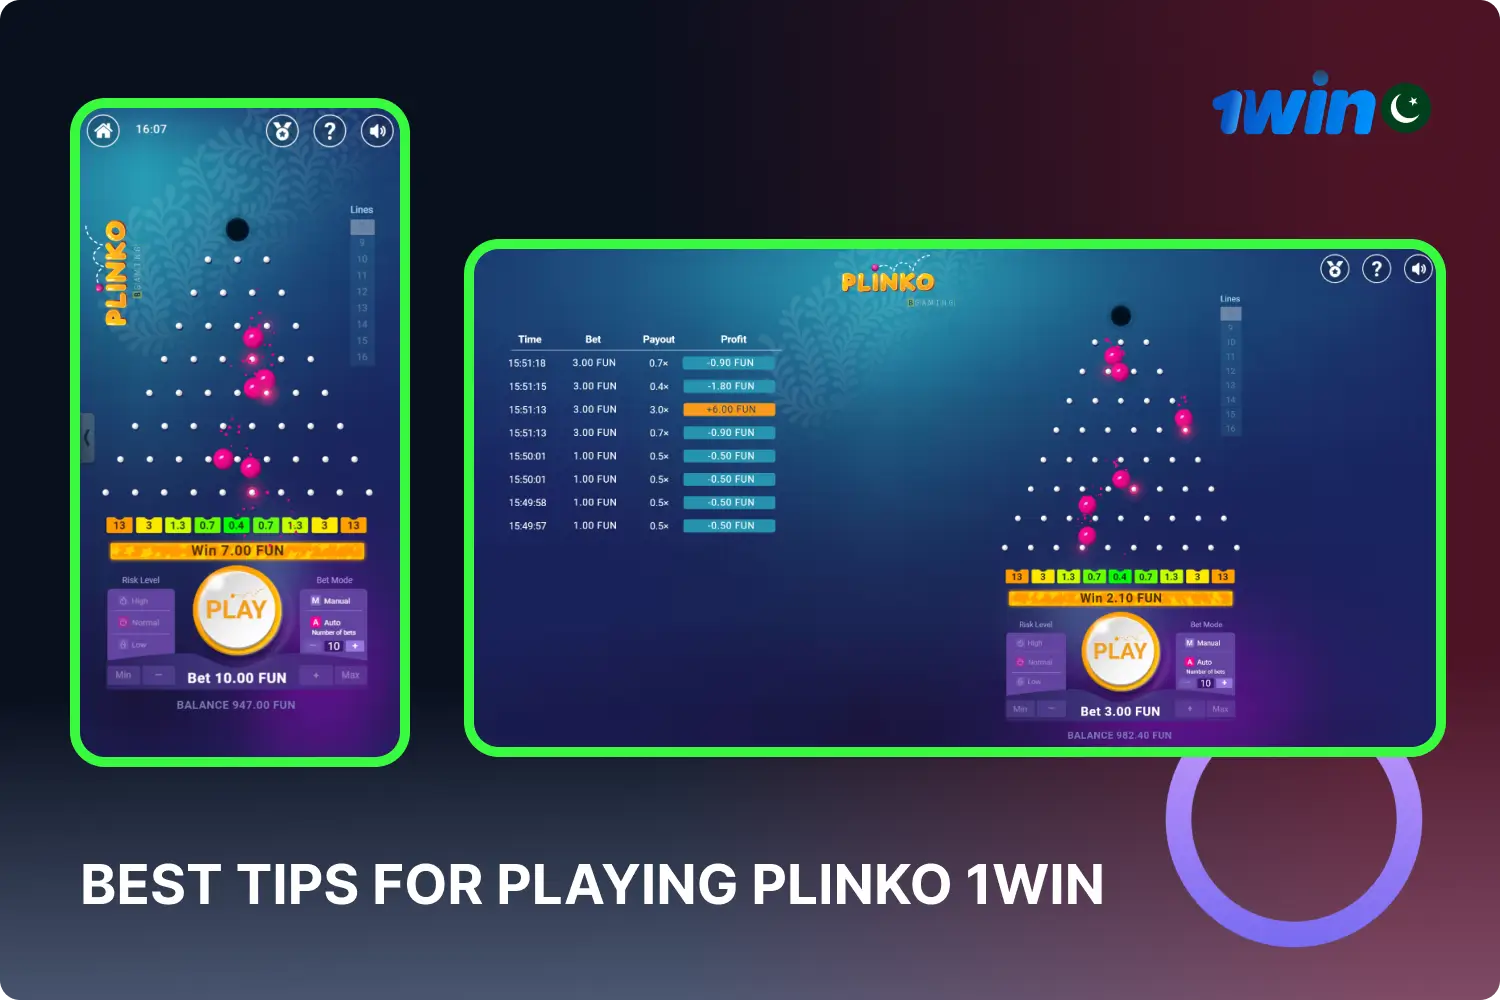 To successfully play Plinko 1win, Pakistani players are advised to allocate a budget for games, set a time limit and start with the demo mode